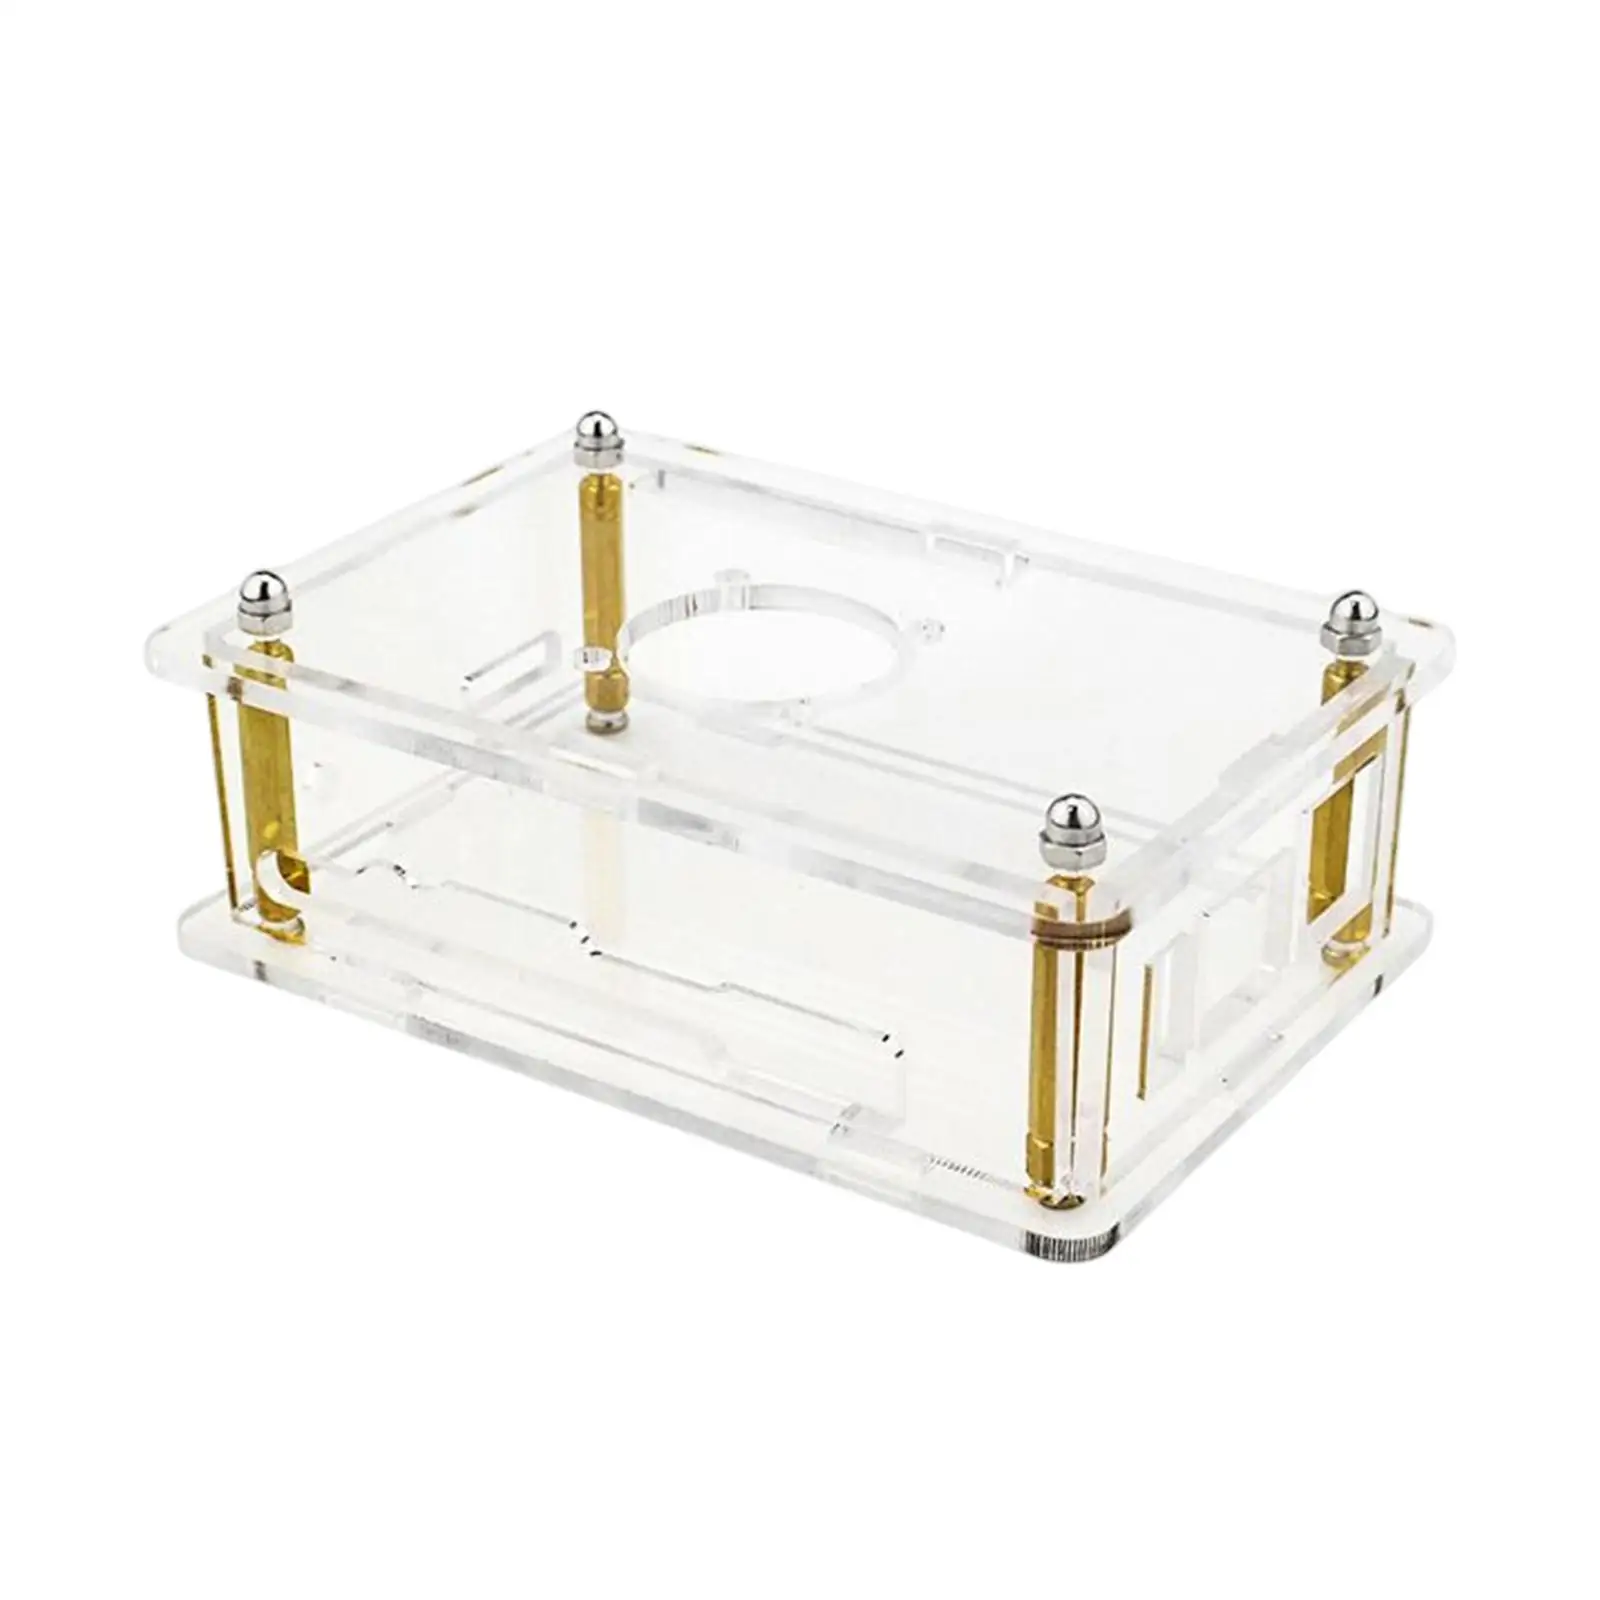 Clear Acrylic Case Copper Aluminum Heat Sink Enclosure Dustproof Accessories Protector Protection Shell for Computer Motherboard